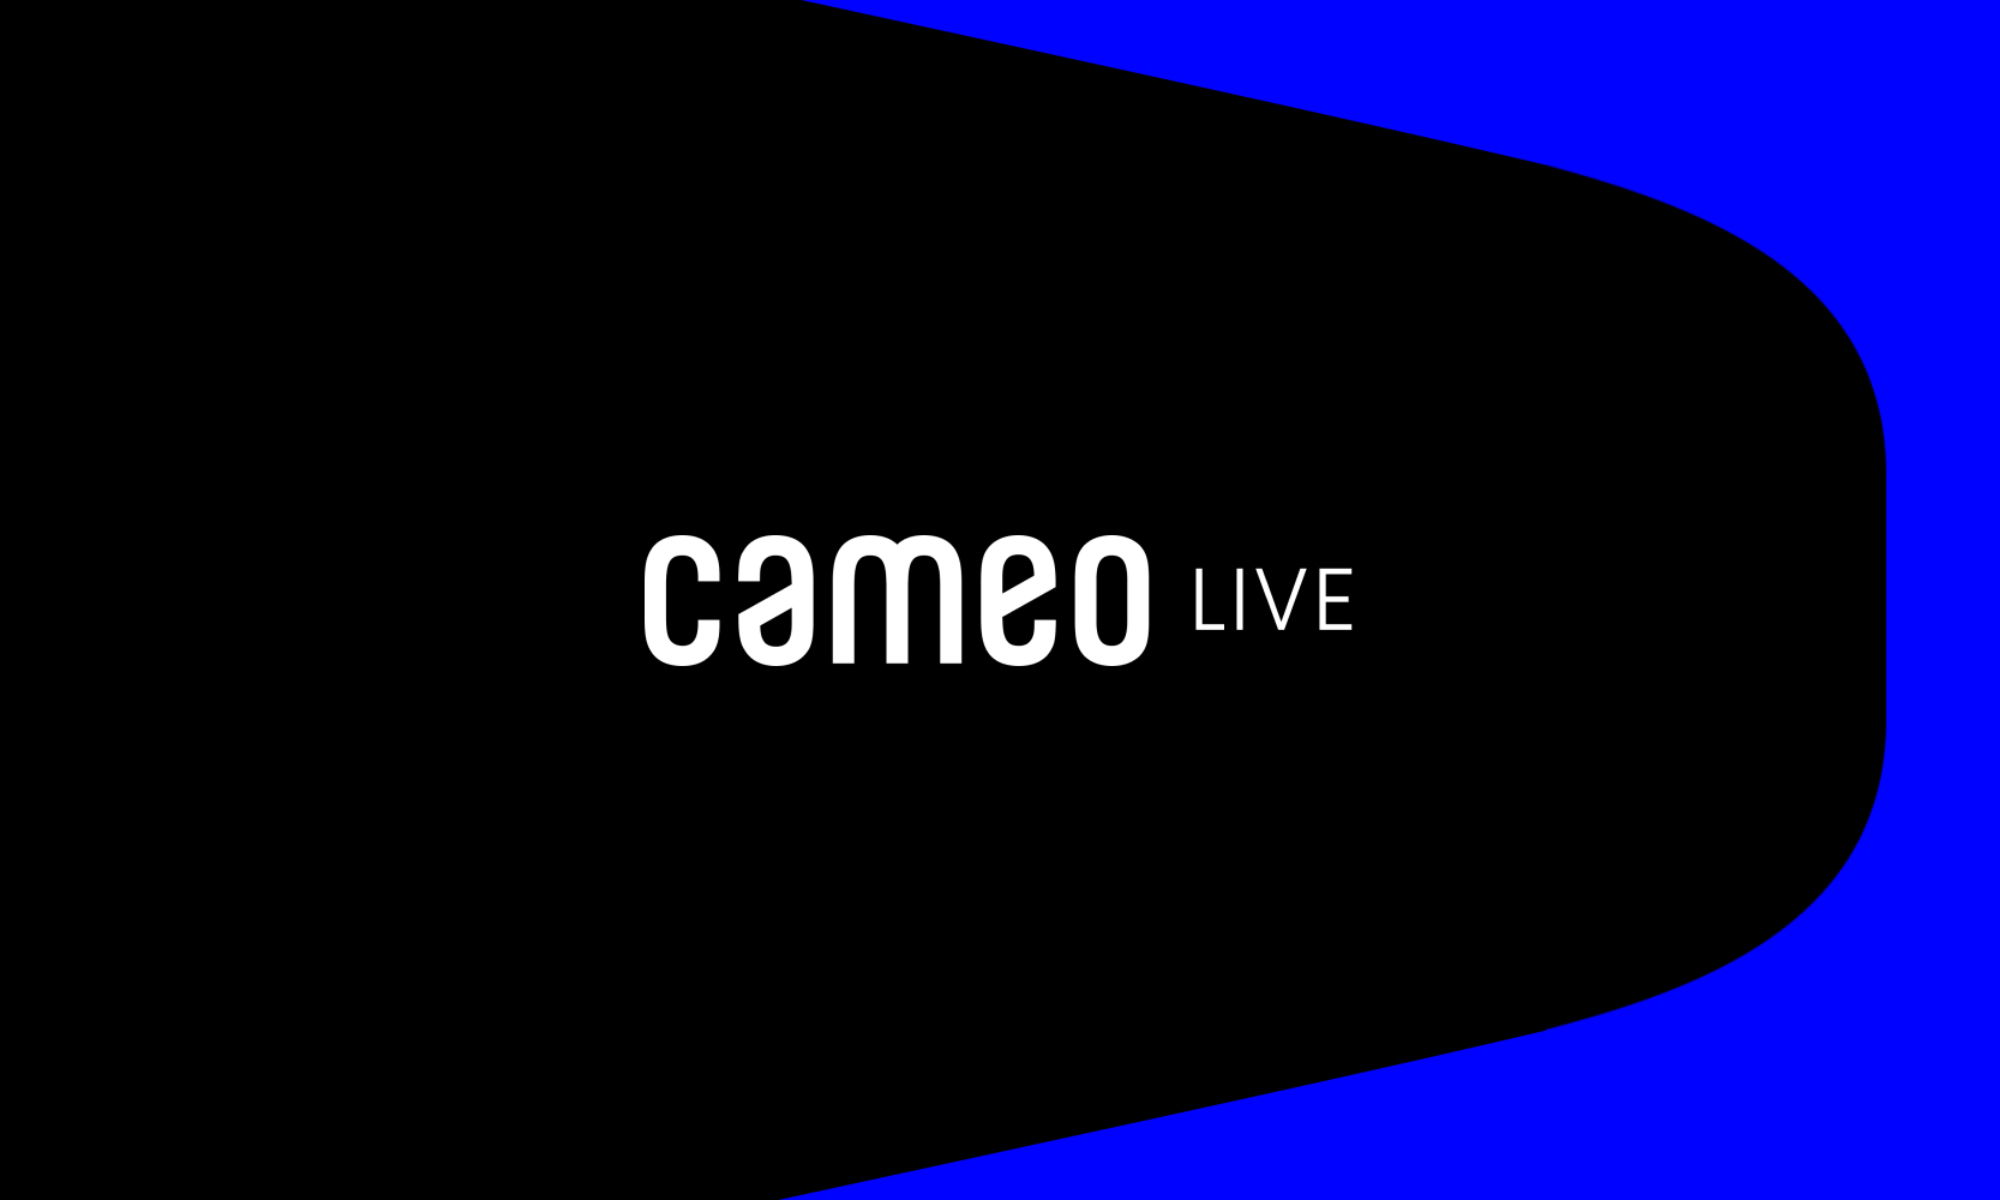 cameo's new feature allows live calls with celebrities